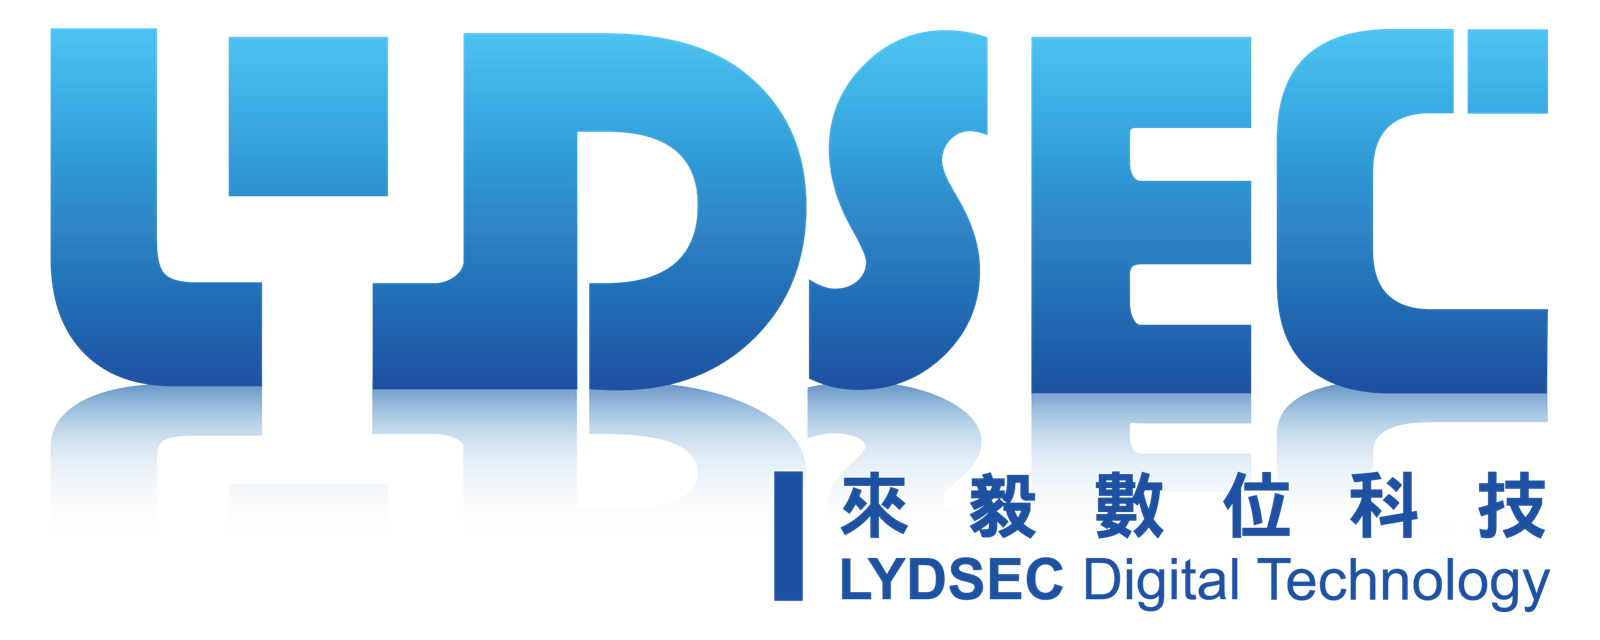 lydsec